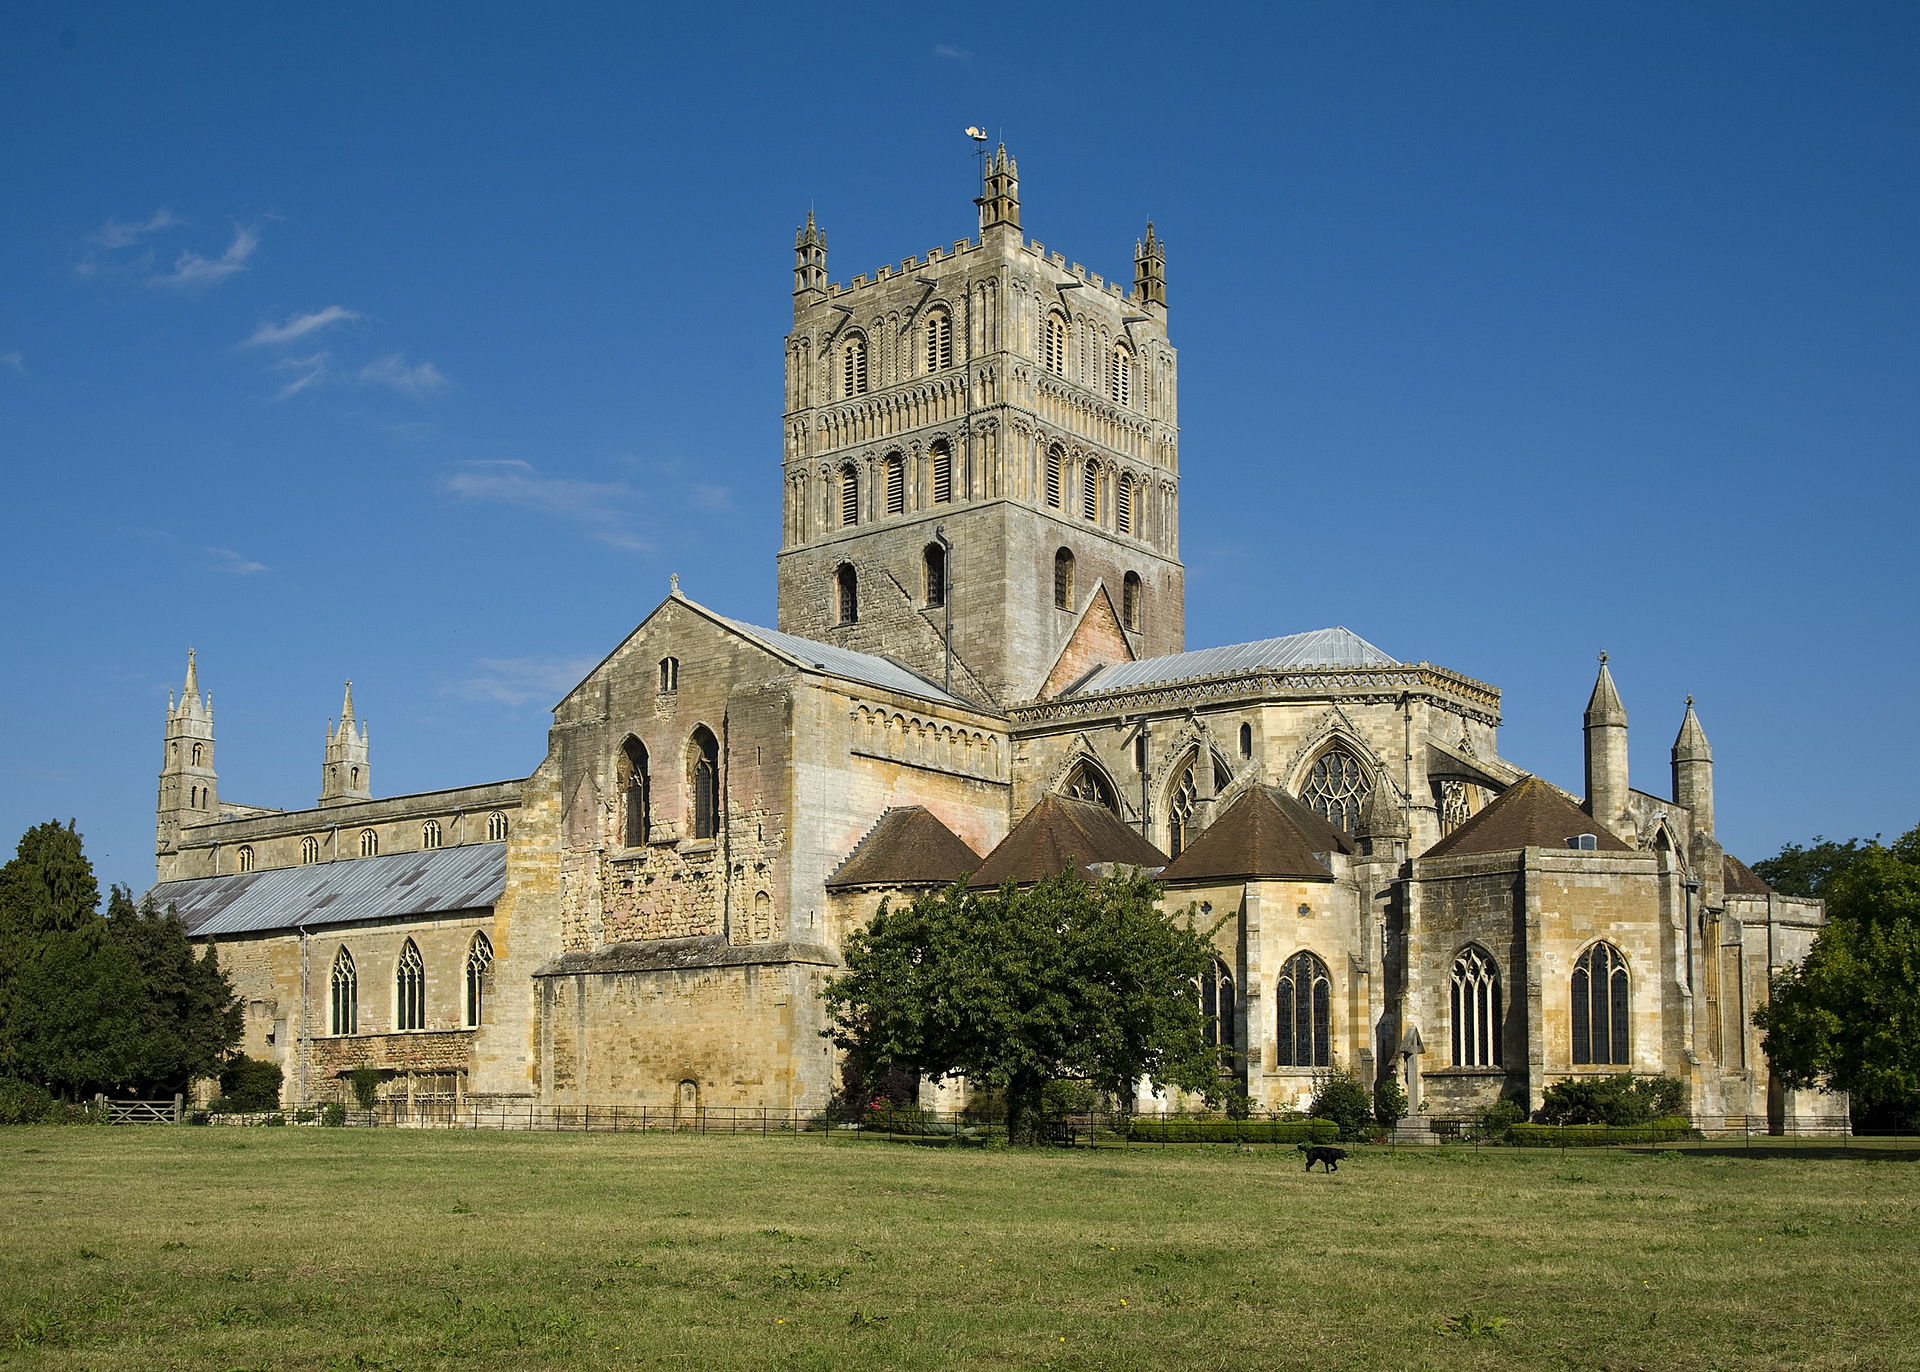 Tewkesbury Abbey, where Mary lodged on her way to Ludlow Castle